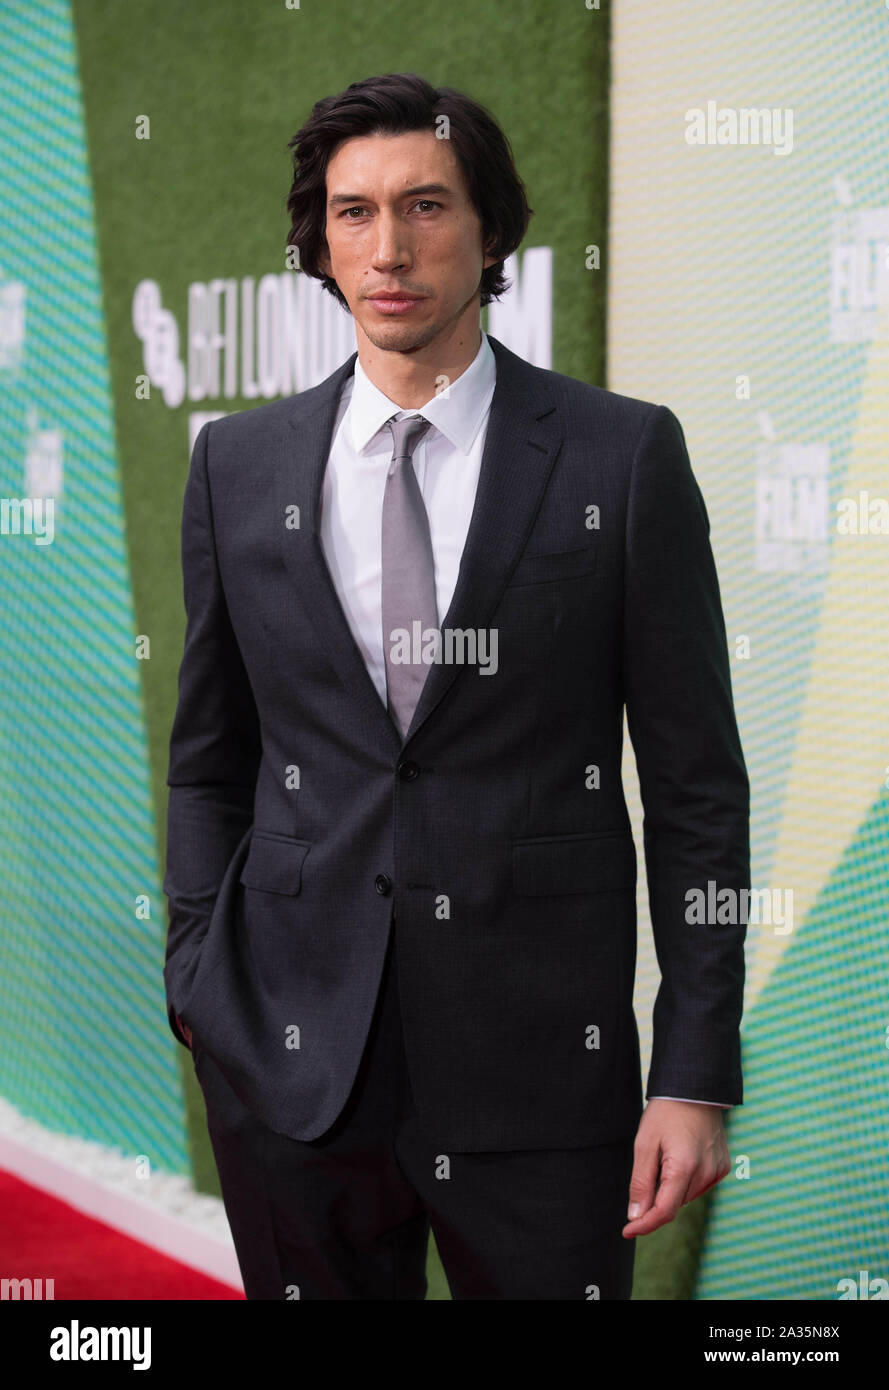 Adam Driver arriving for The Report premiere, as part of the BFI London Film Festival, at the Embankment Garden Cinema in London. Stock Photo